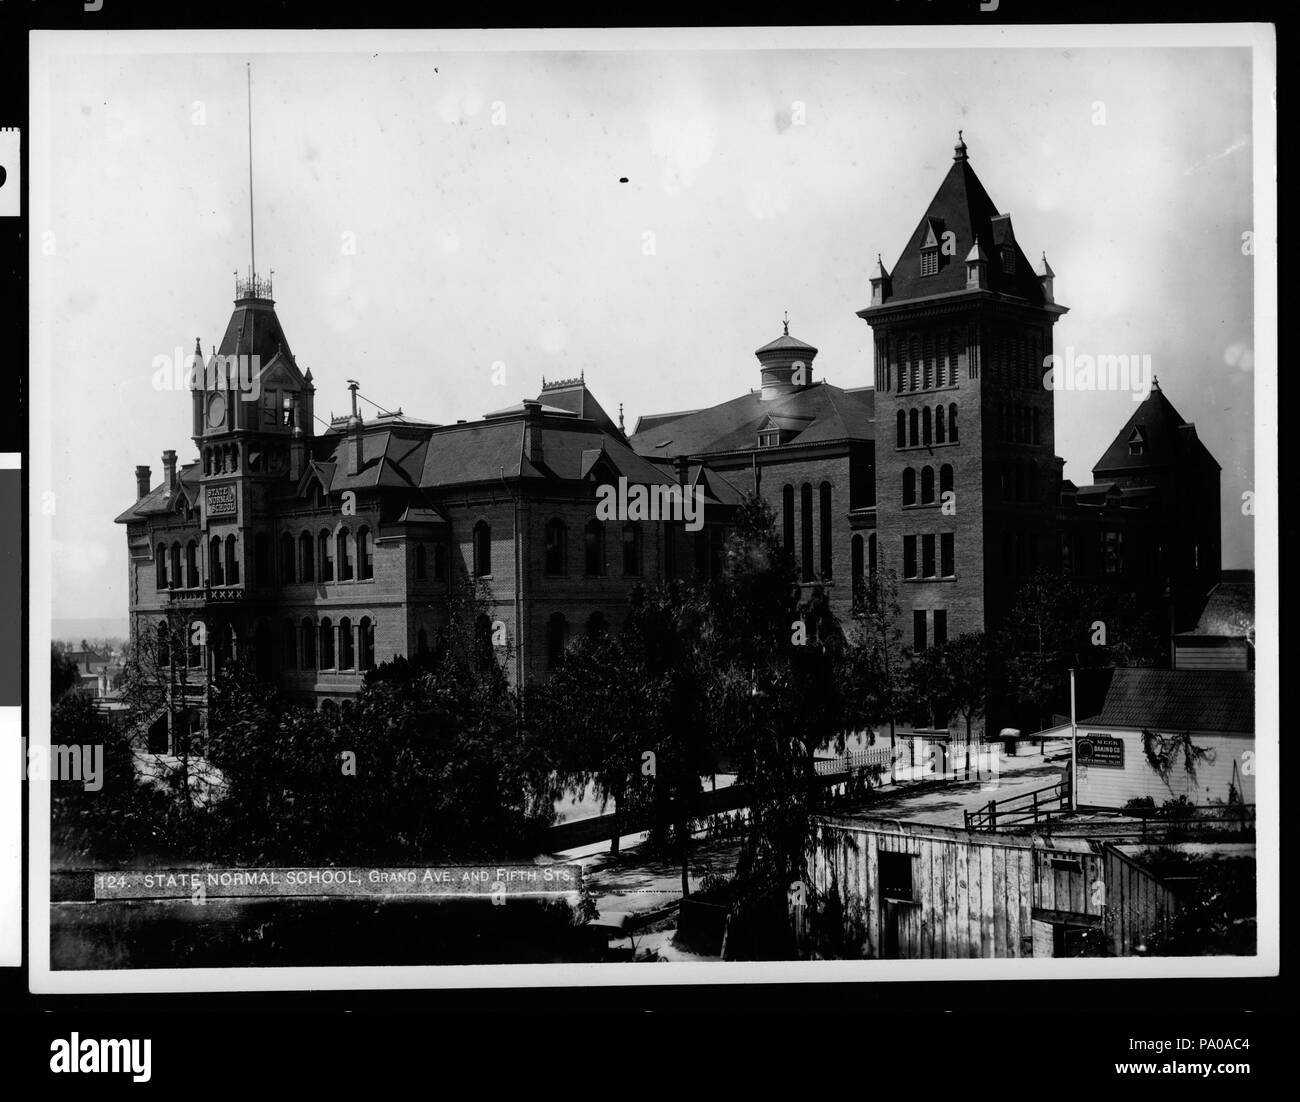 . English: Legacy record ID: chs-m4629; USC-1-1-1-4726 Title: Exterior view of California State Normal School, Grand Avenue and 5th Street, Los Angeles, ca.1900 Photographer: Pierce, C.C. (Charles C.), 1861-1946 Filename: CHS-124 Coverage date: circa 1900 Part of collection: California Historical Society Collection, 1860-1960 Type: images Geographic subject (city or populated place): Los Angeles Repository name: USC Libraries Special Collections Description: Photograph of exterior view of California State Normal School, Grand Avenue and 5th Street, Los Angeles, ca.1900. The expansive three-sto Stock Photo